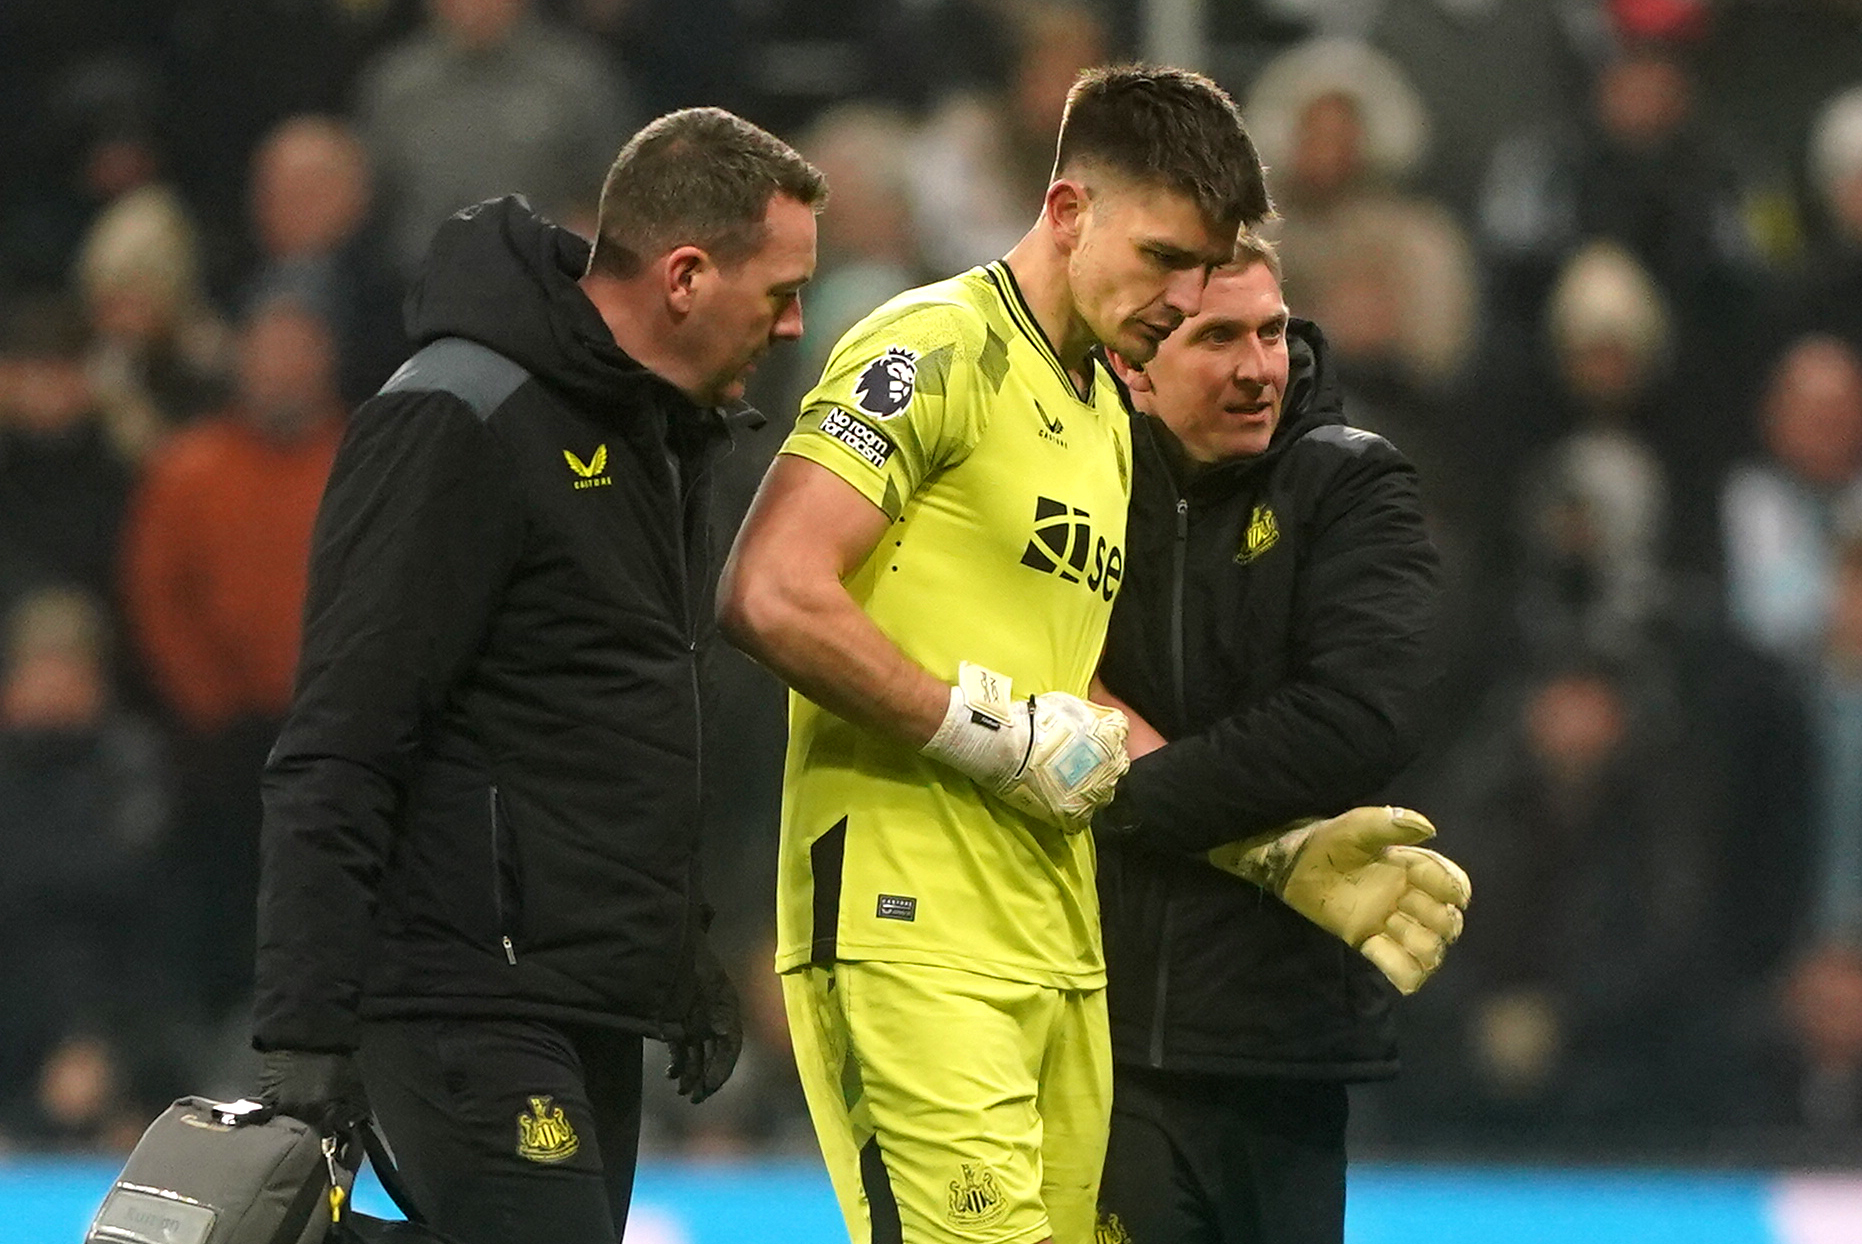 Newcastle keeper Nick Pope (centre) suffered a dislocated shoulder late in the game